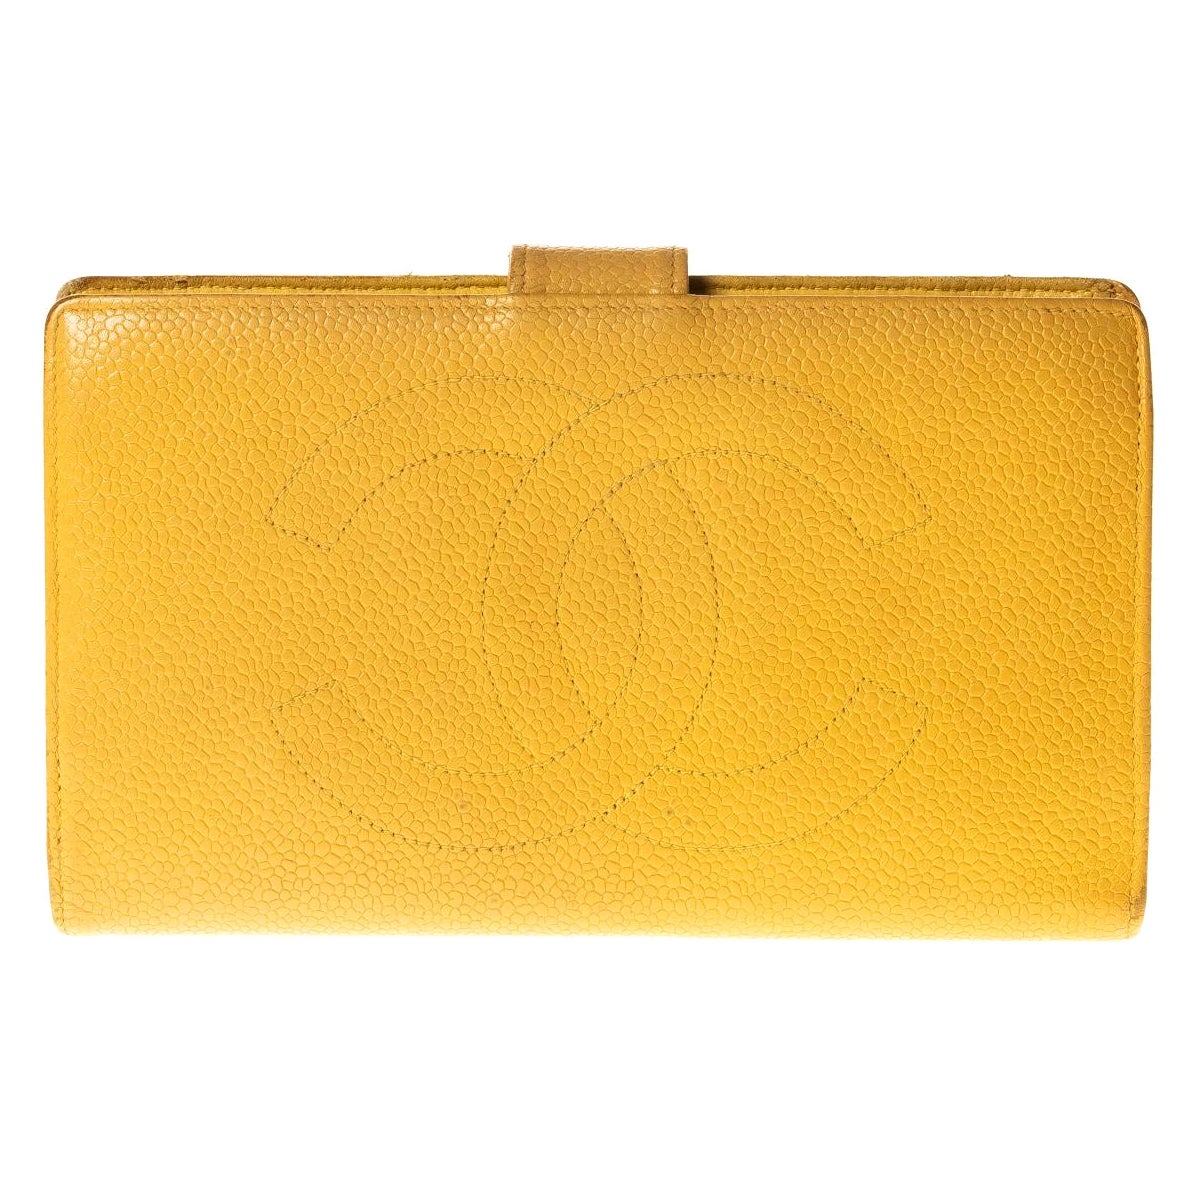 Chanel Caviar CC Mustard Yellow Compact Snap Wallet 1997 For Sale